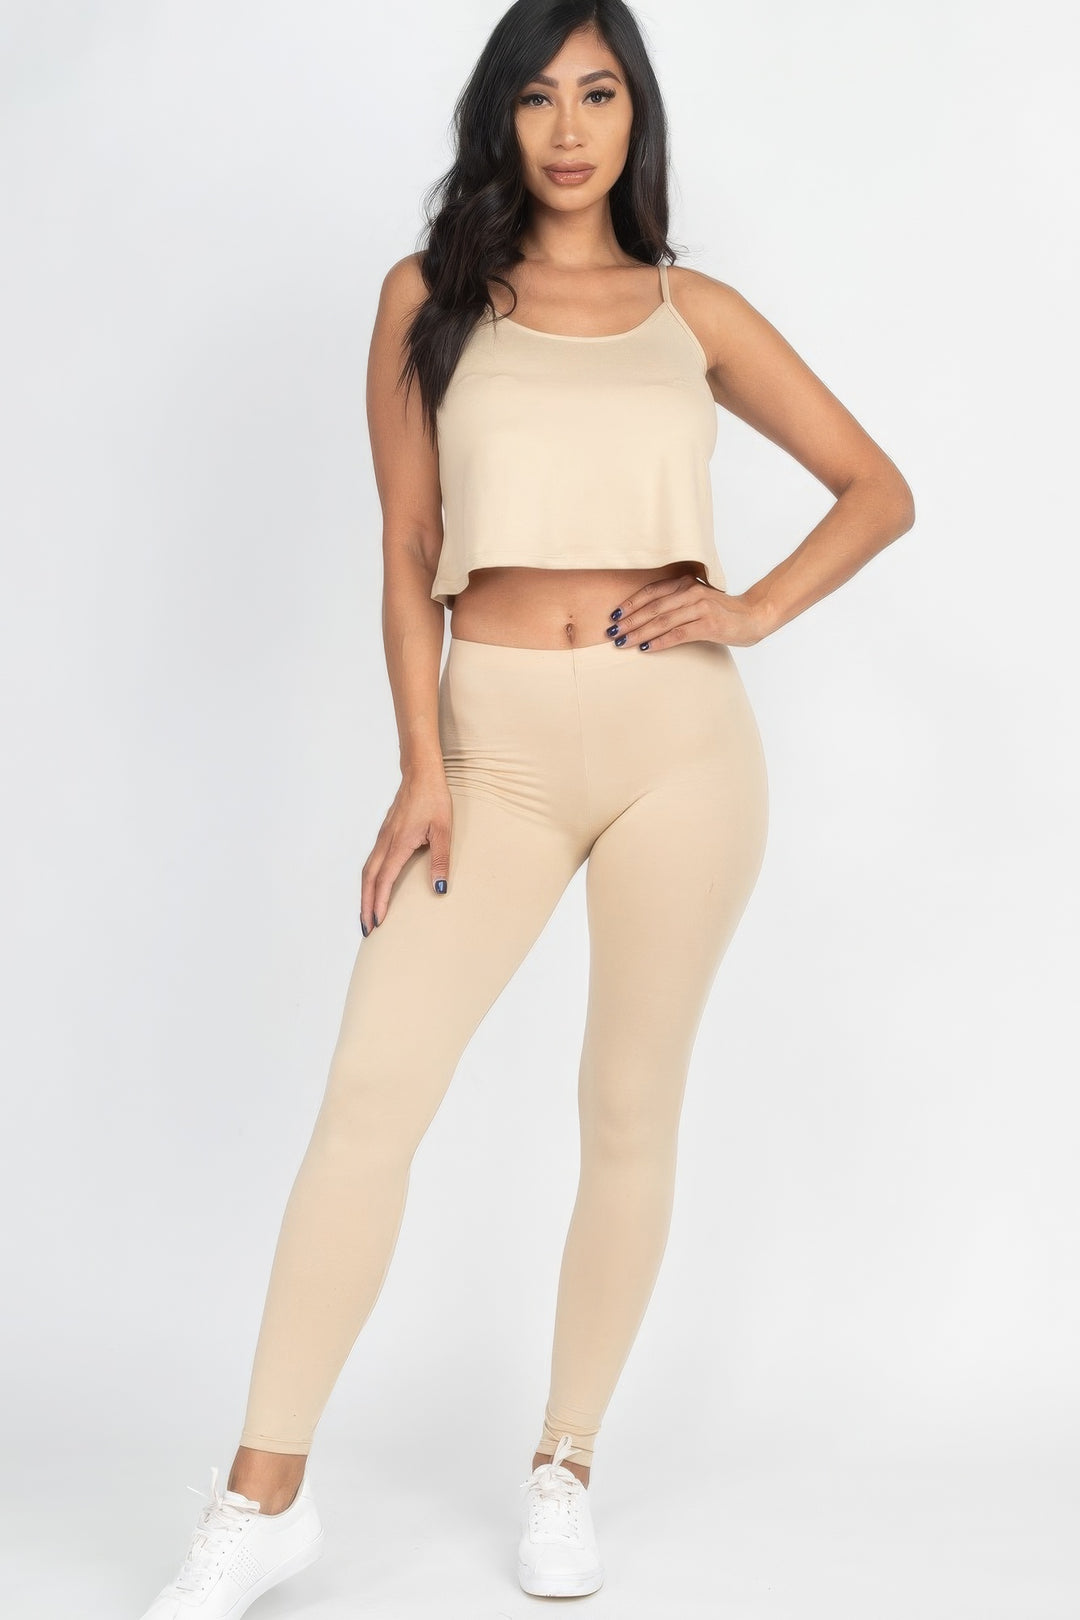 a woman in a beige crop top and leggings